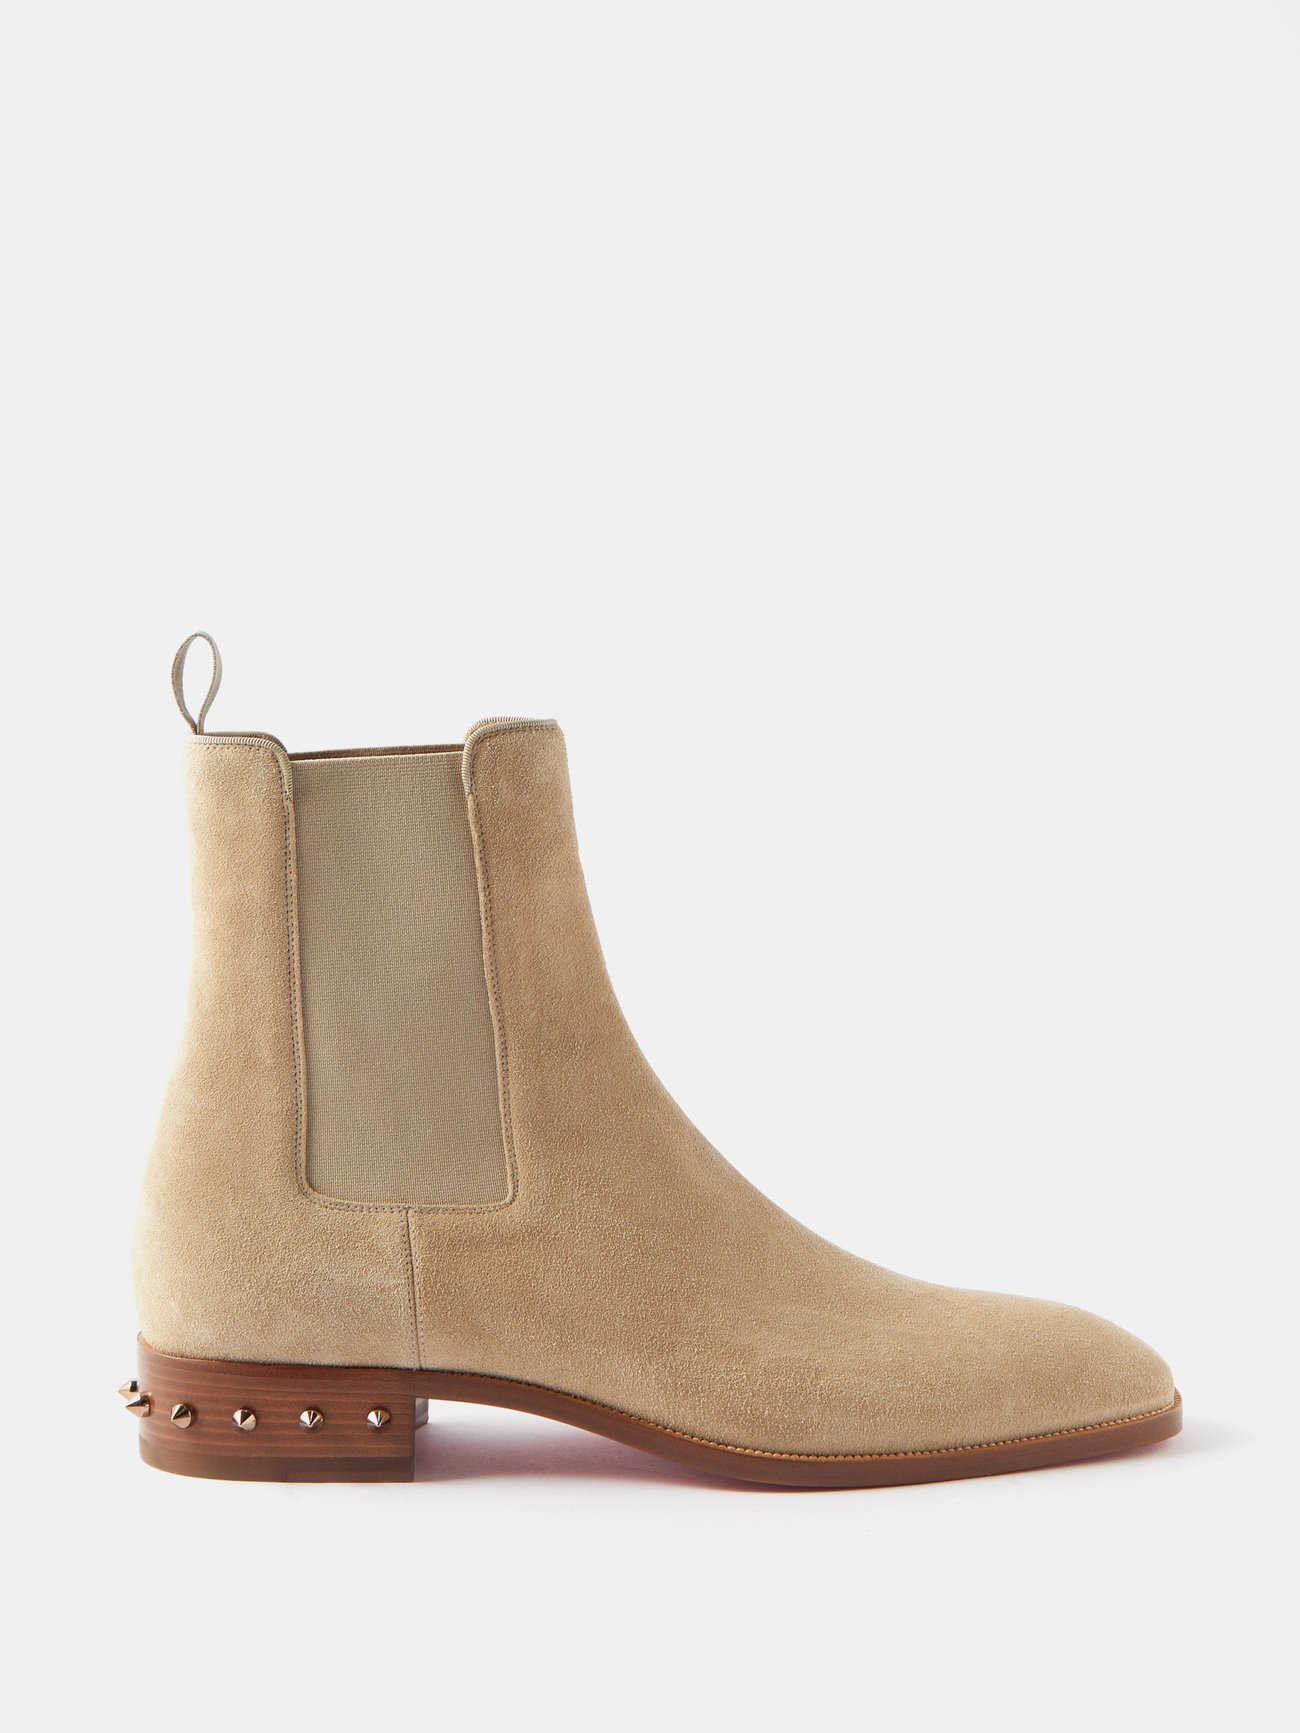 Christian Louboutin Taupe Leather Spiked Red Sole Pull On Chelsea Boots,  W's 35